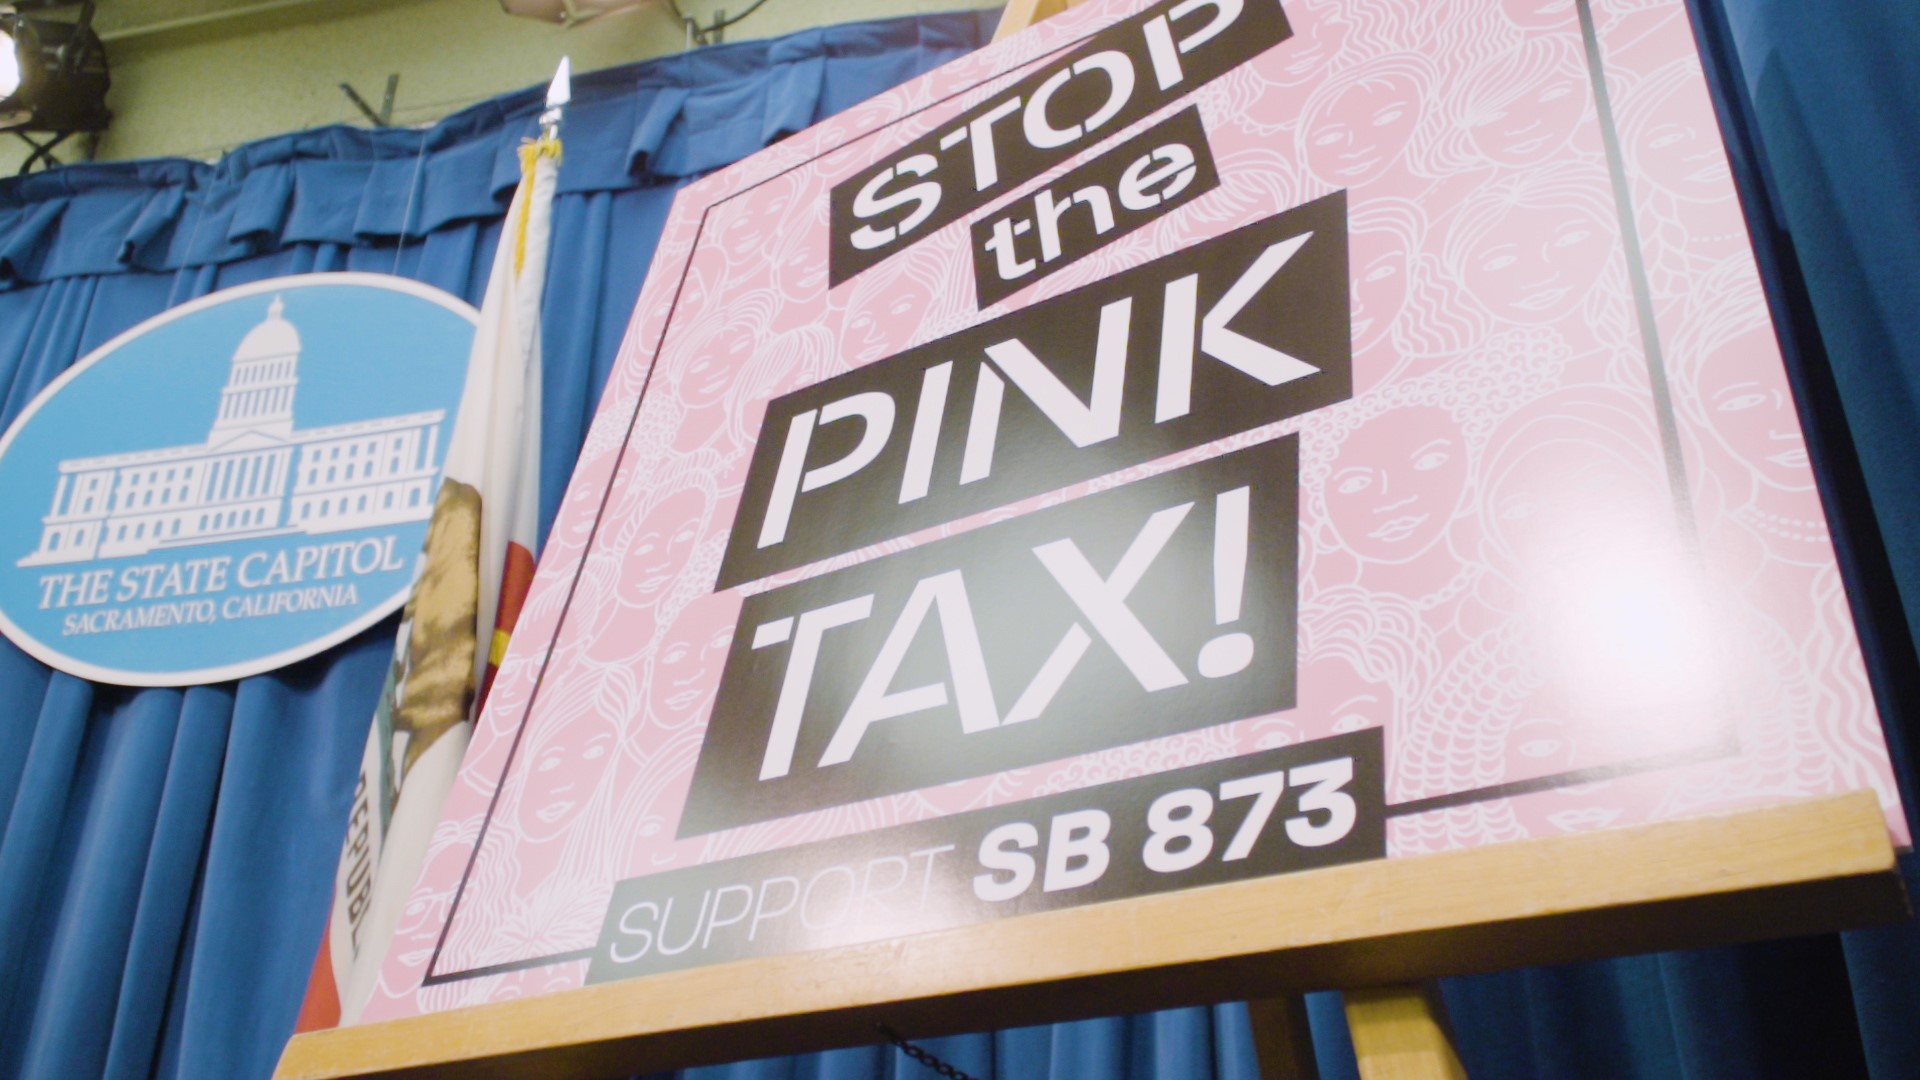 The 'pink tax' refers to the price difference between nearly identical products marketed towards different genders.